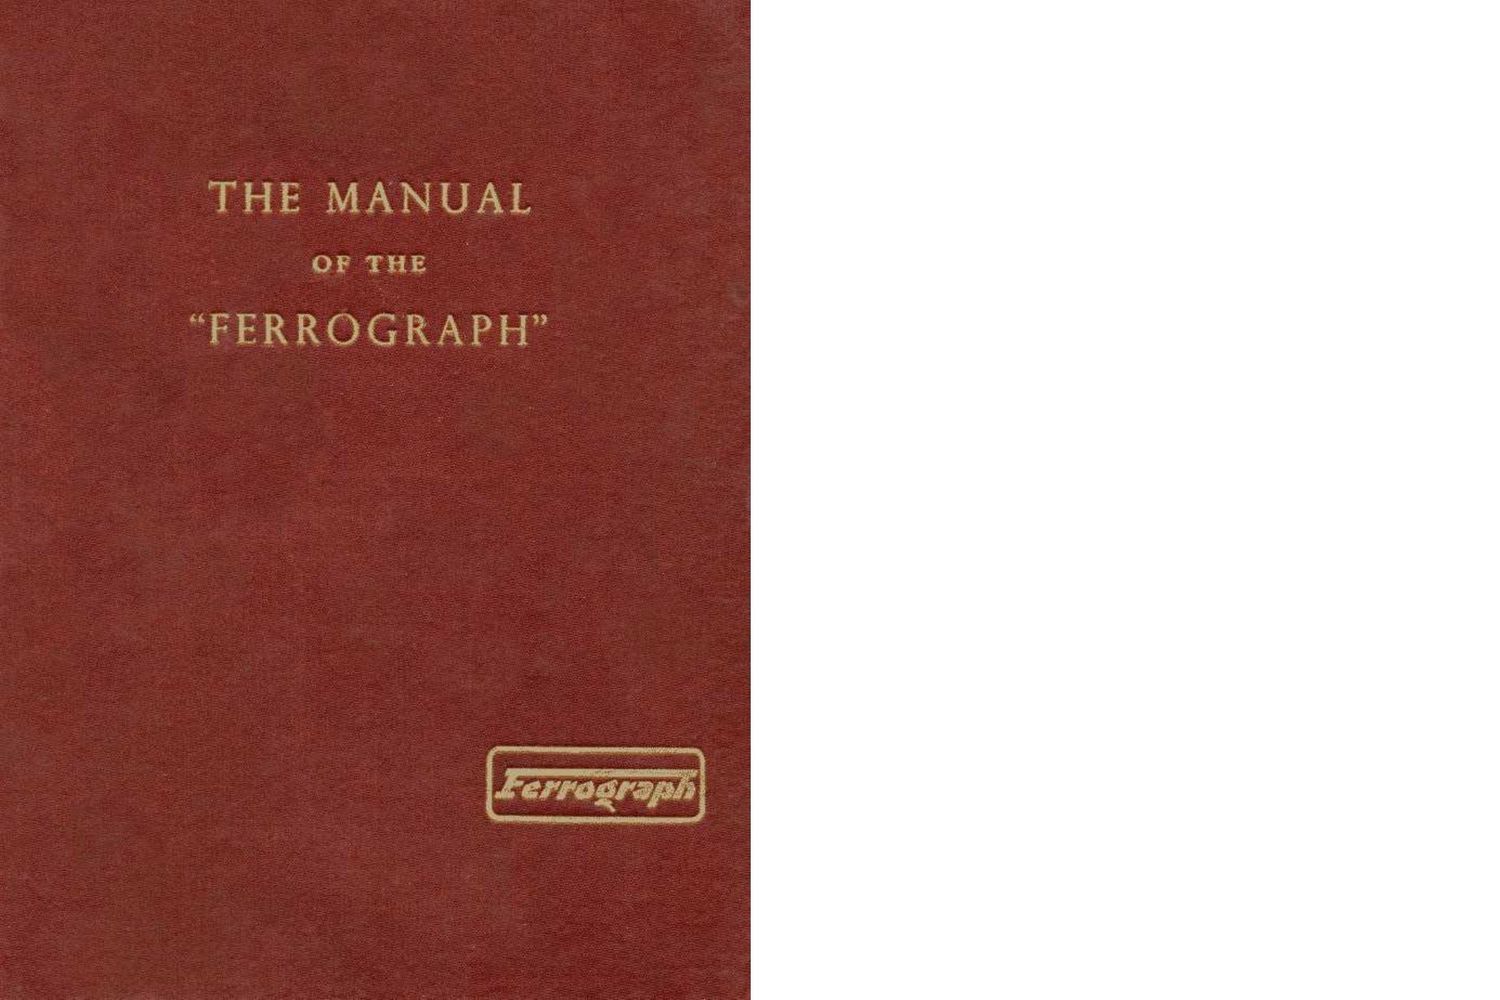 Ferrograph 2 A Owners Manual